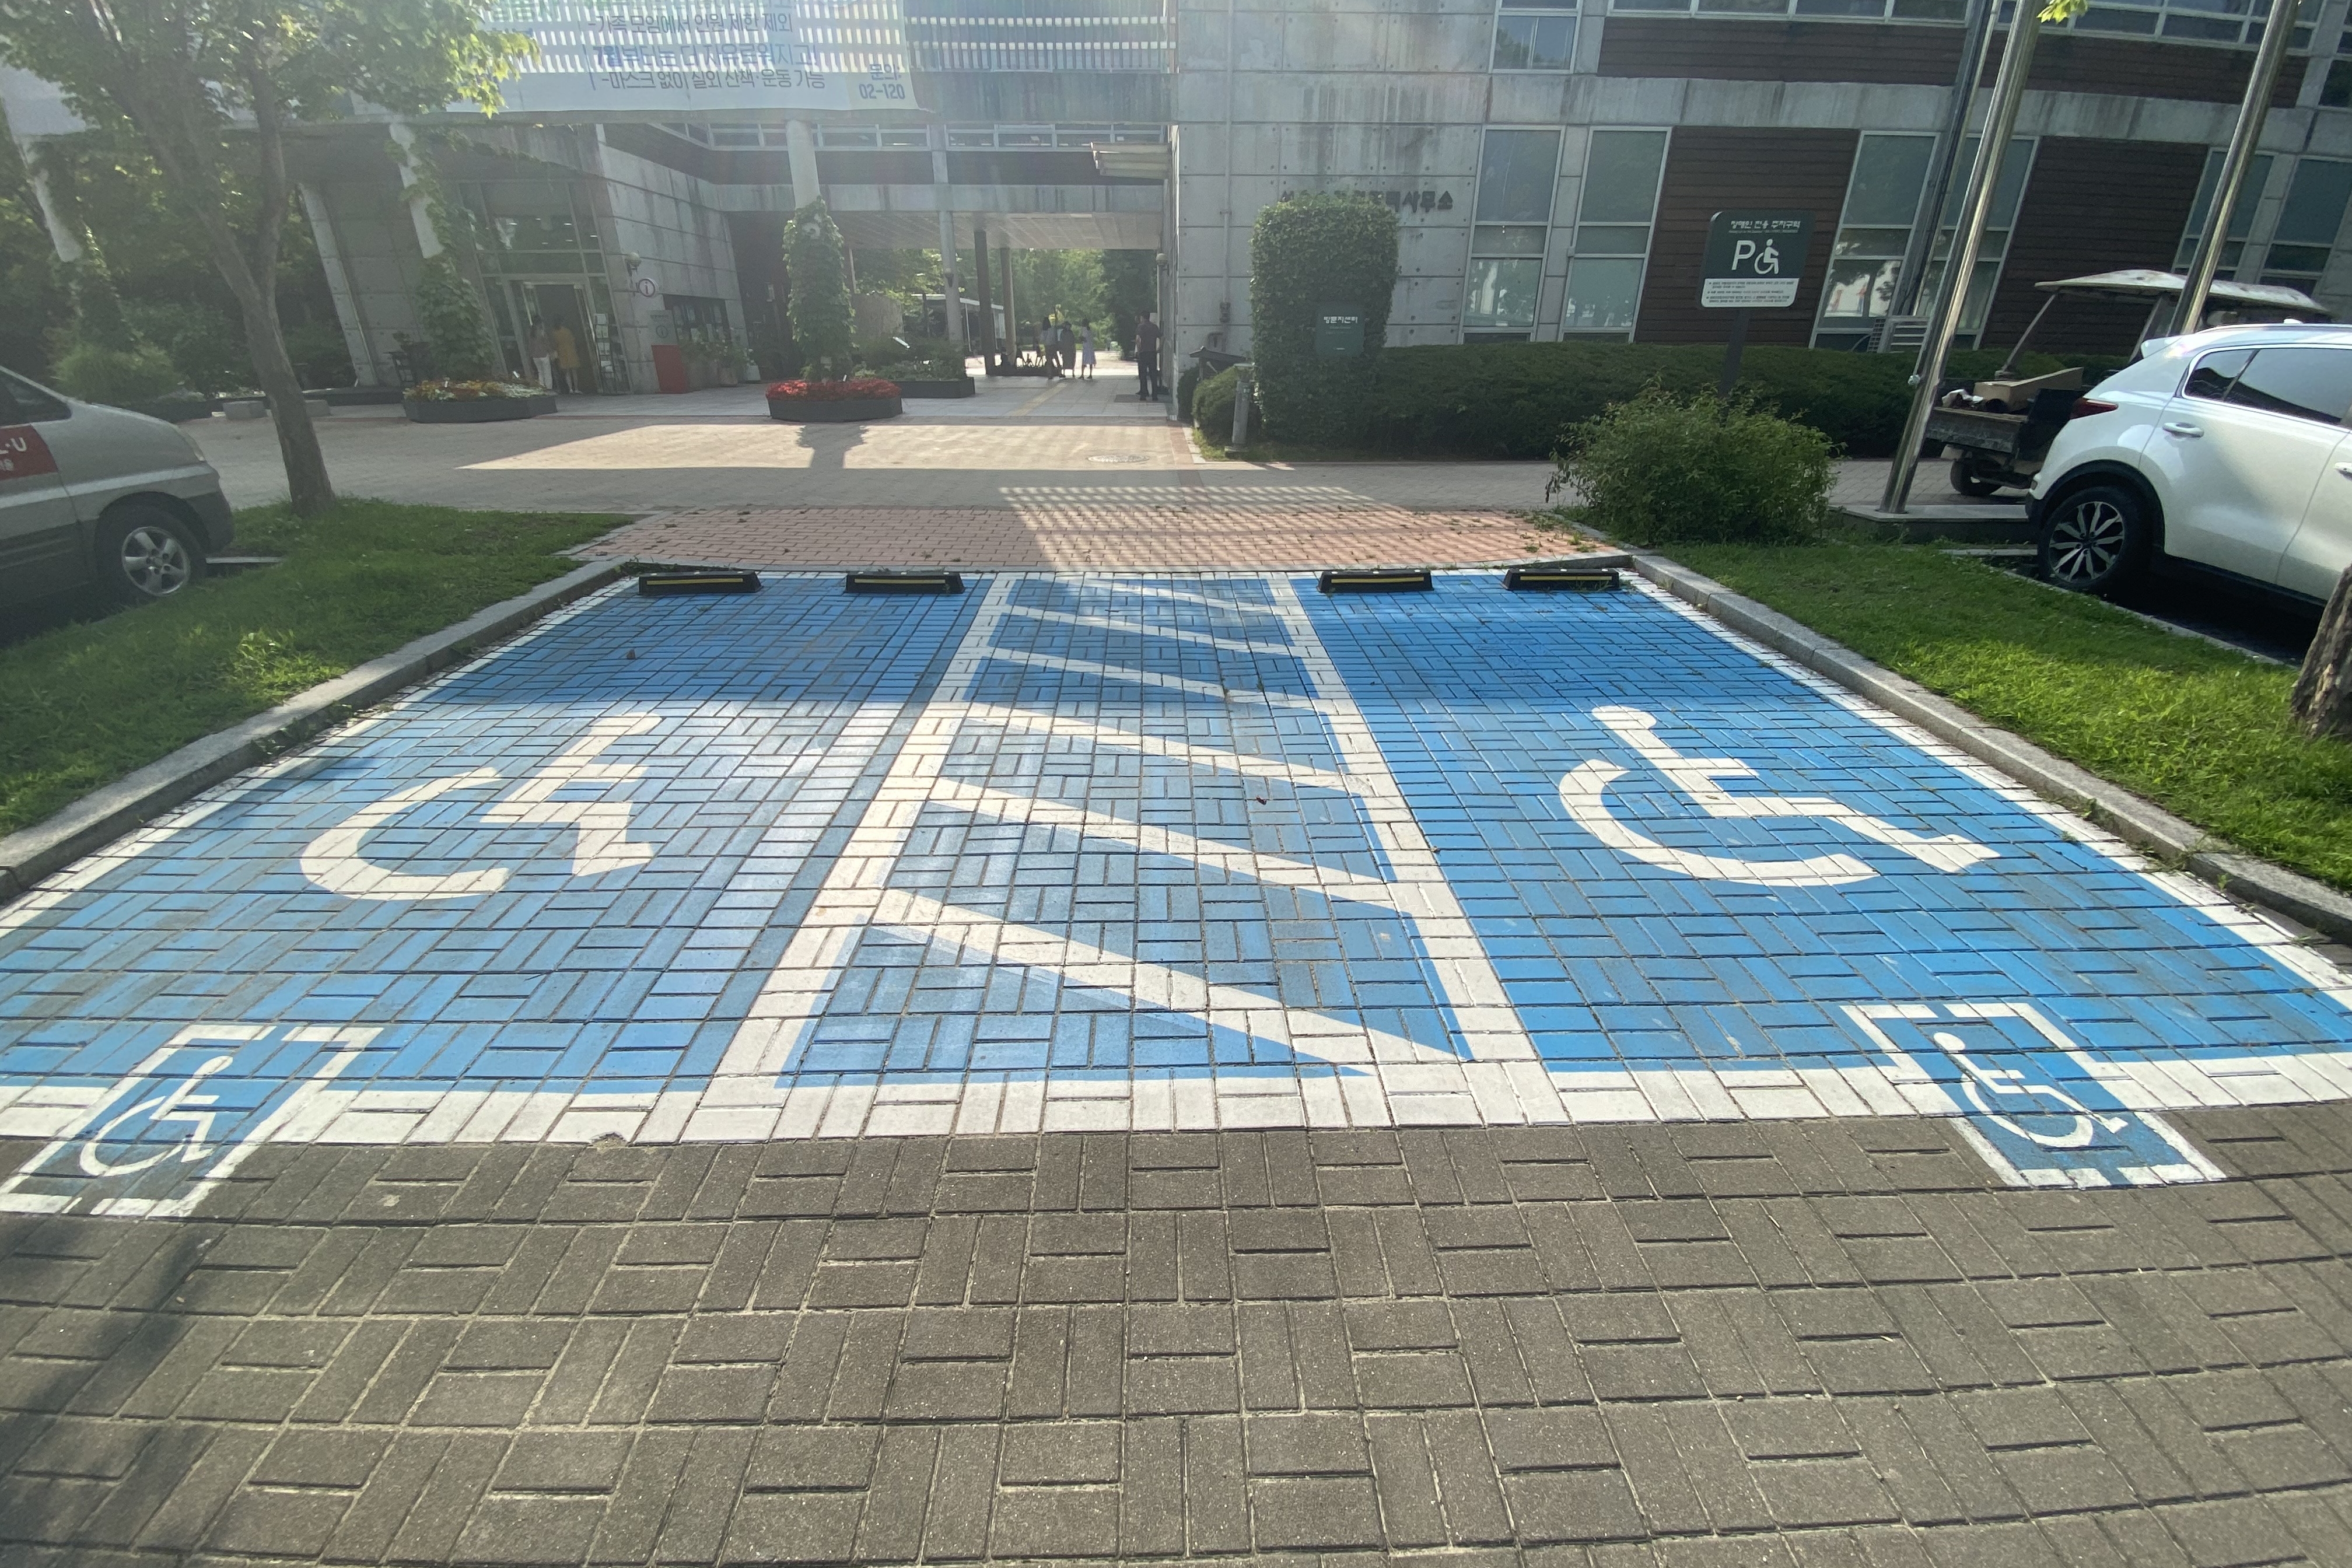 Parking facilities for persons with disabilities0 : Accessible parking lots with hatched lines
